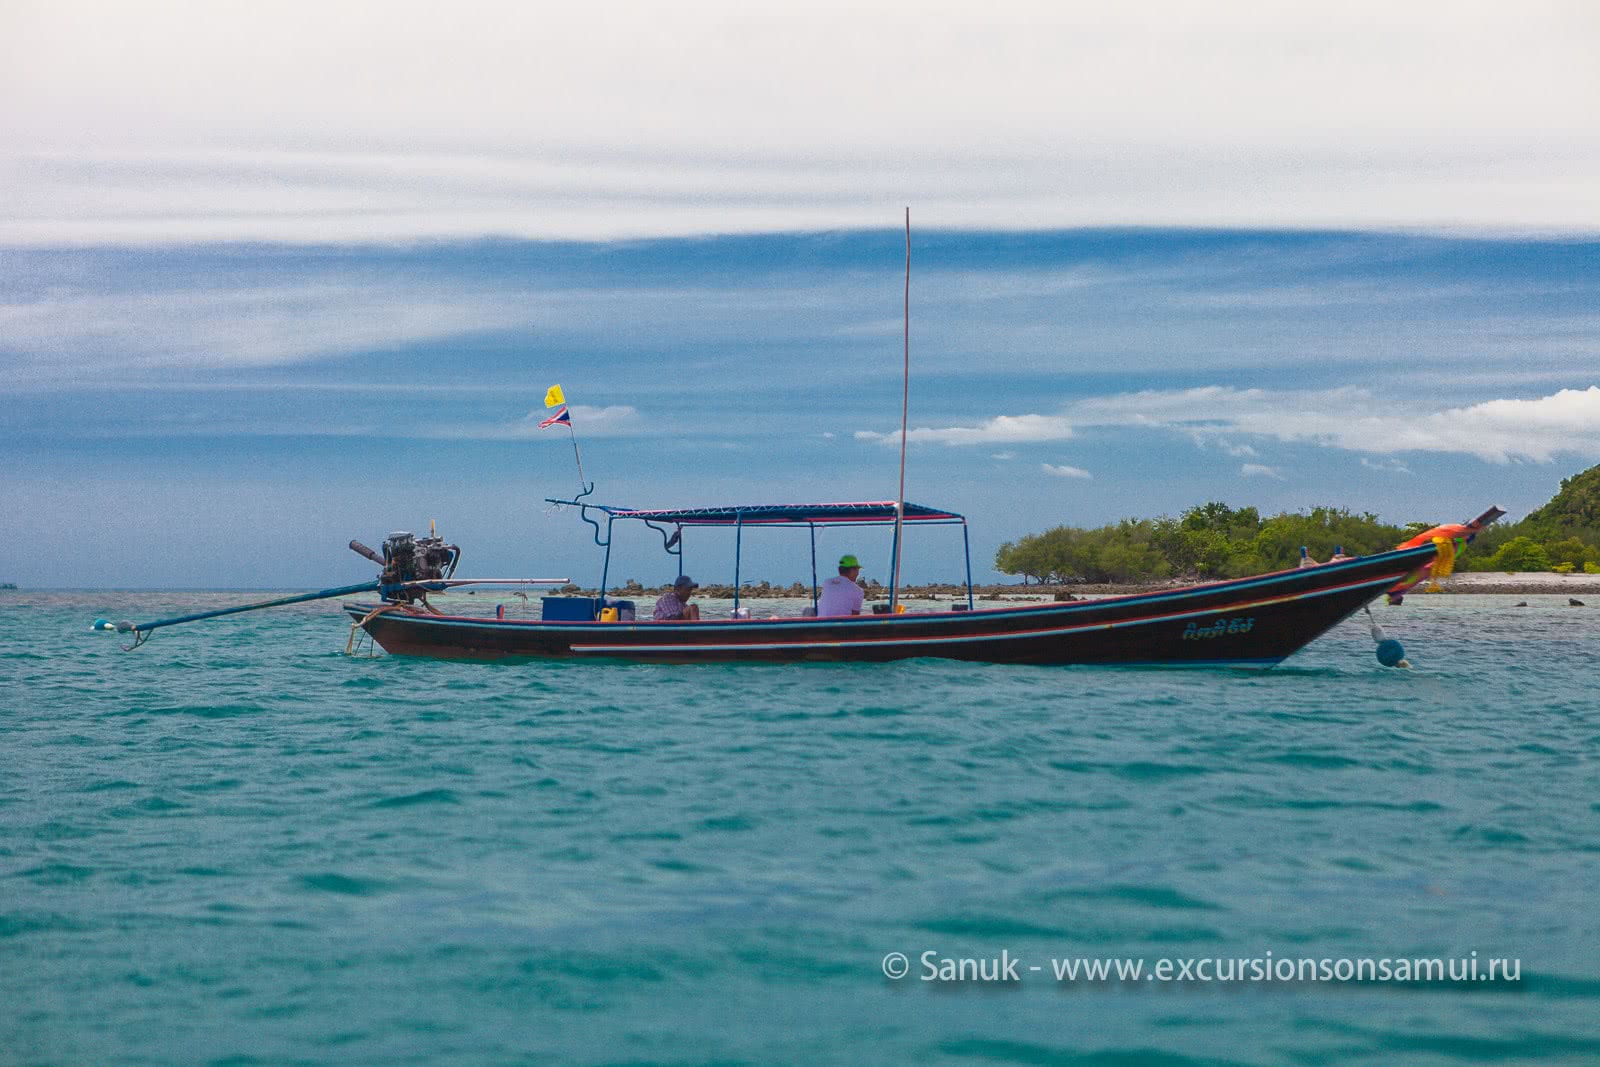 Snorkeling and fishing in the waters of Koh Tan, Koh Samui, Thailand